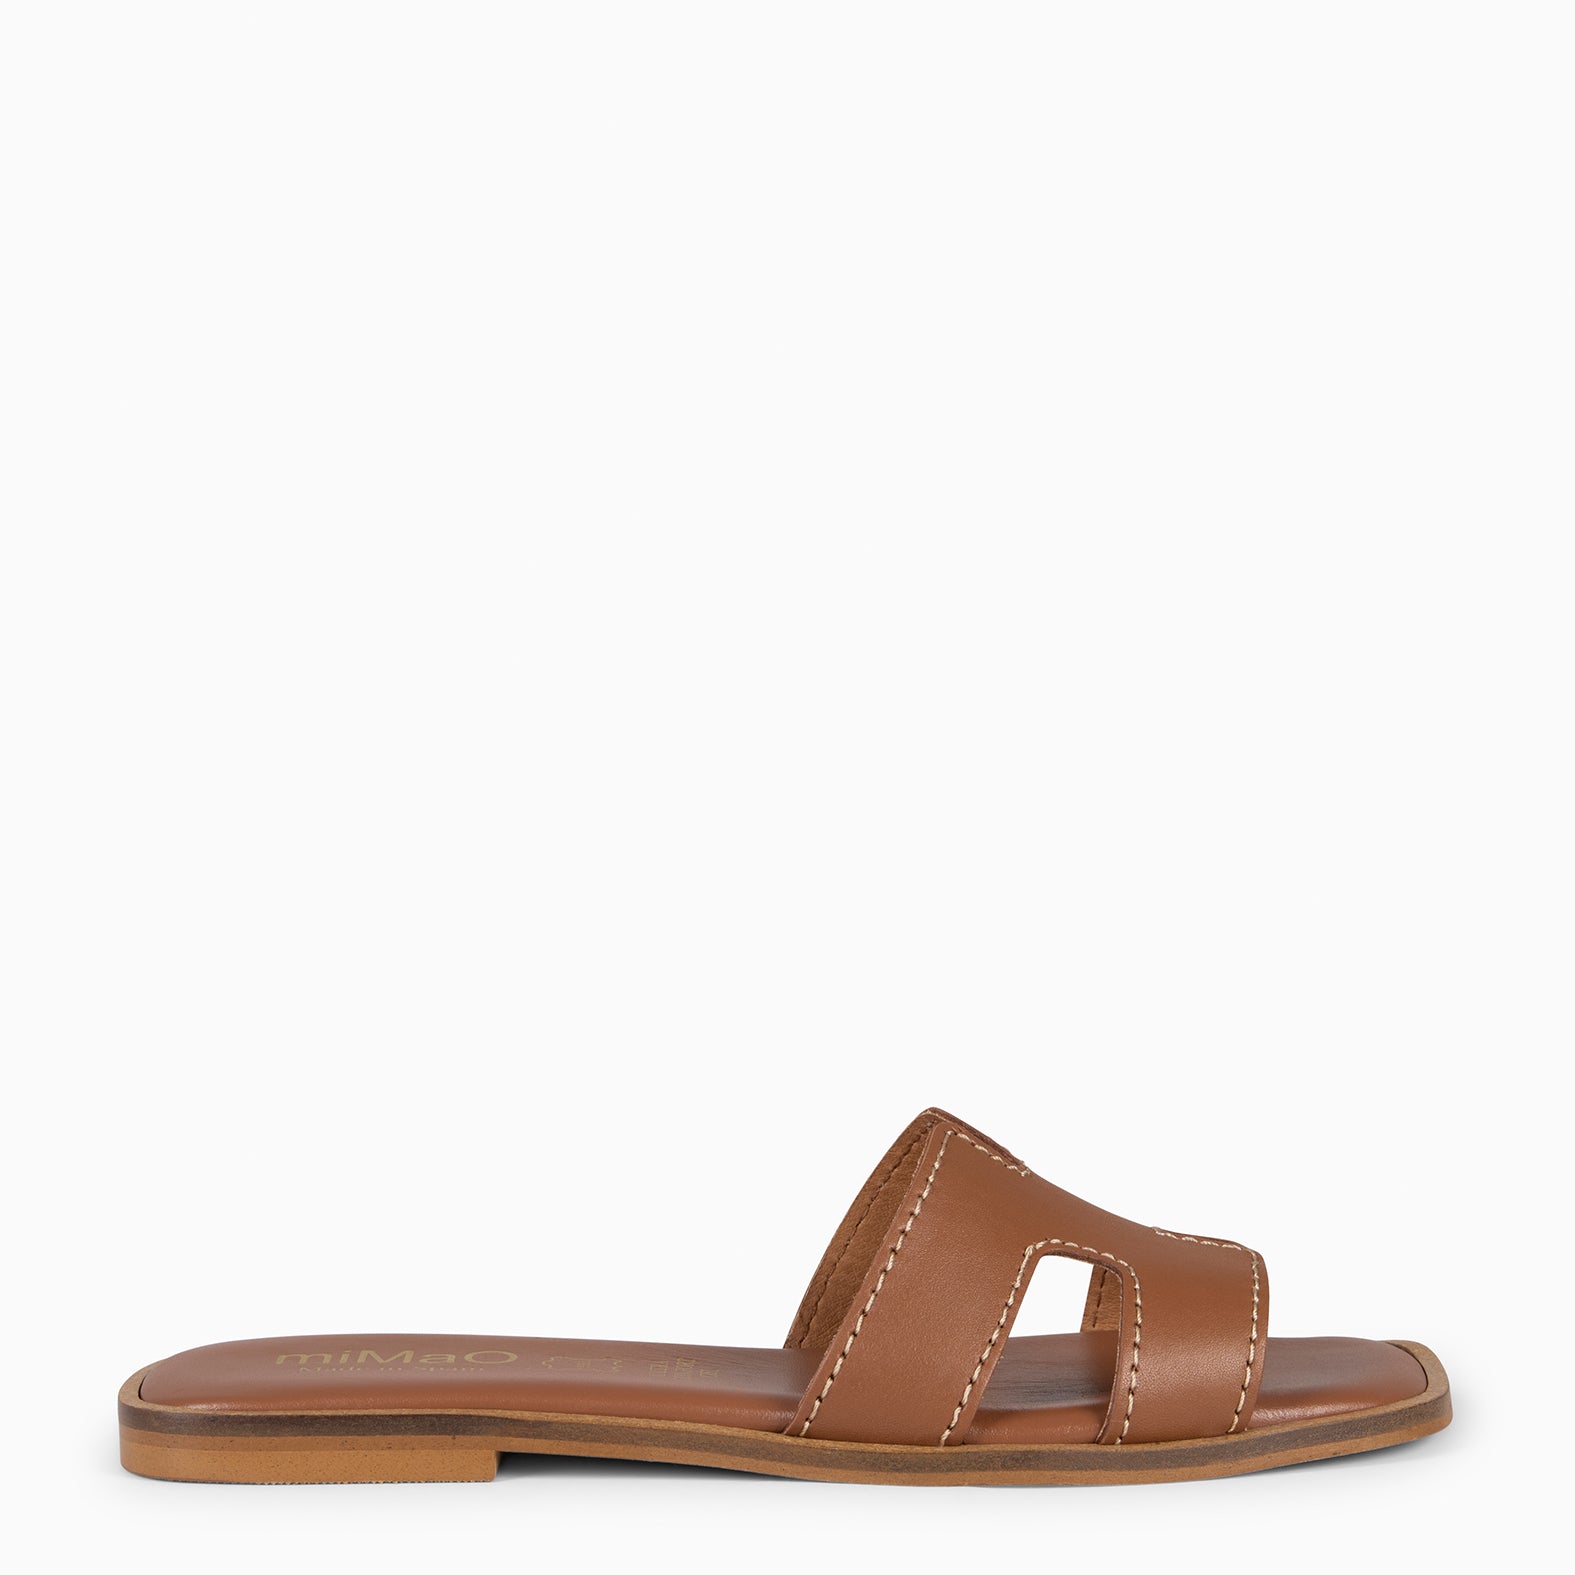 LUXOR – LEATHER Flat Sandals